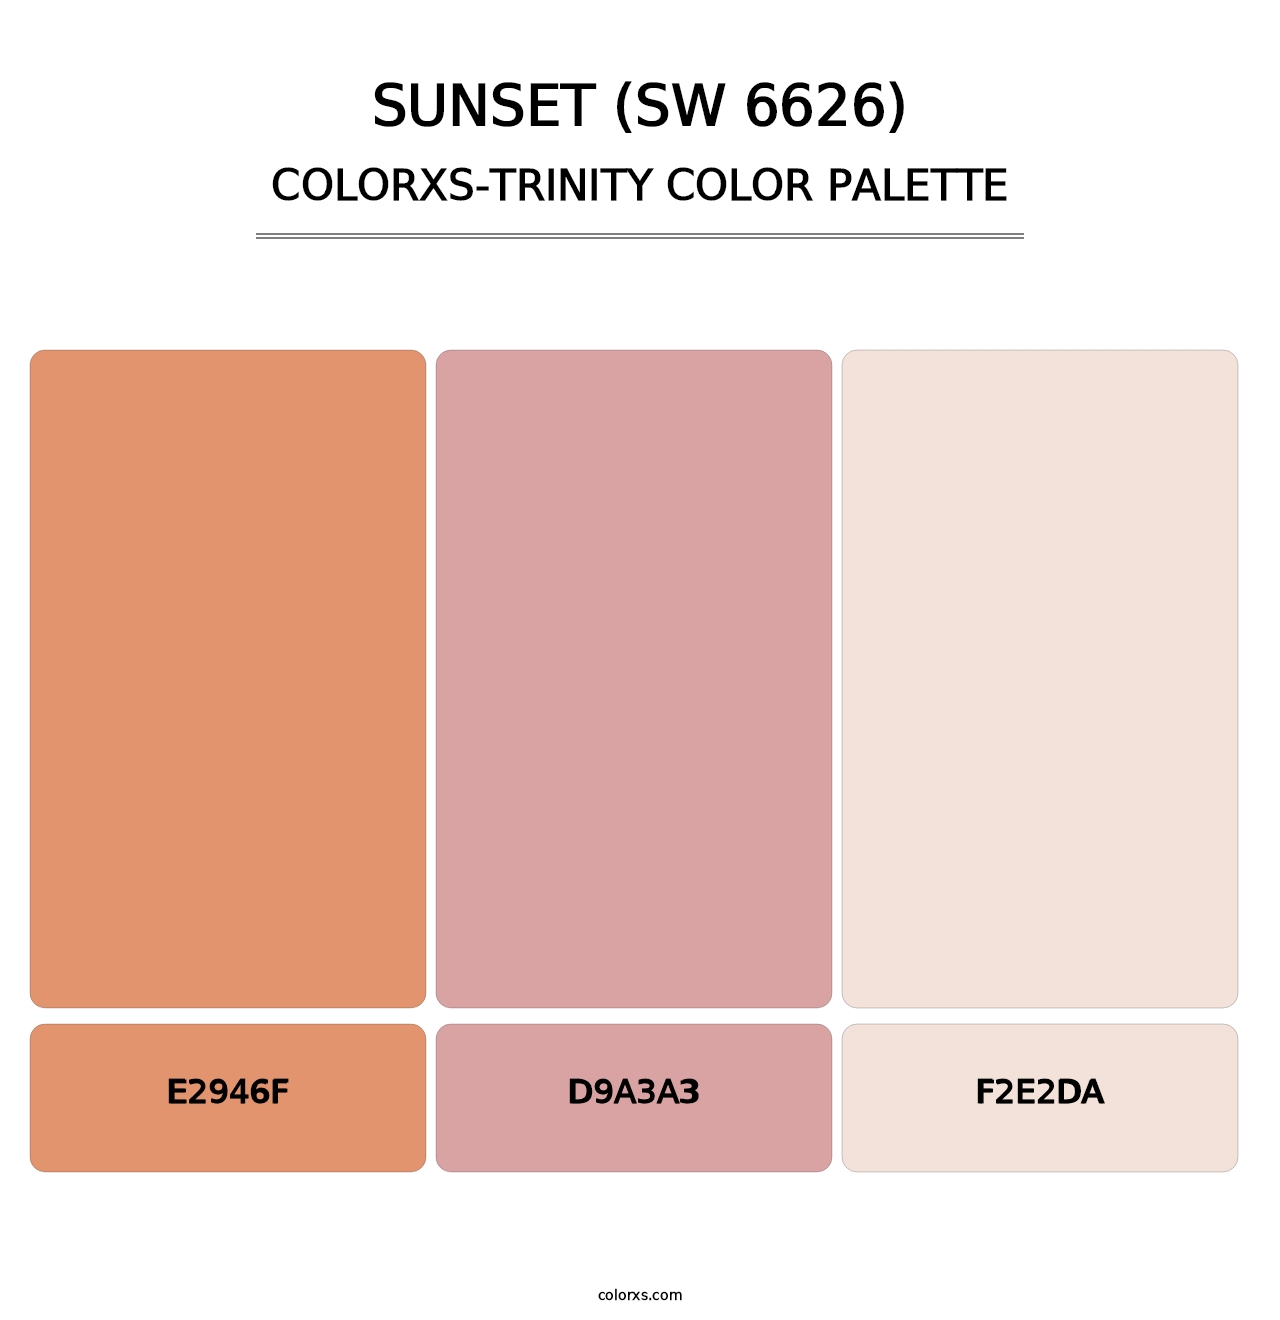 Sunset (SW 6626) - Colorxs Trinity Palette